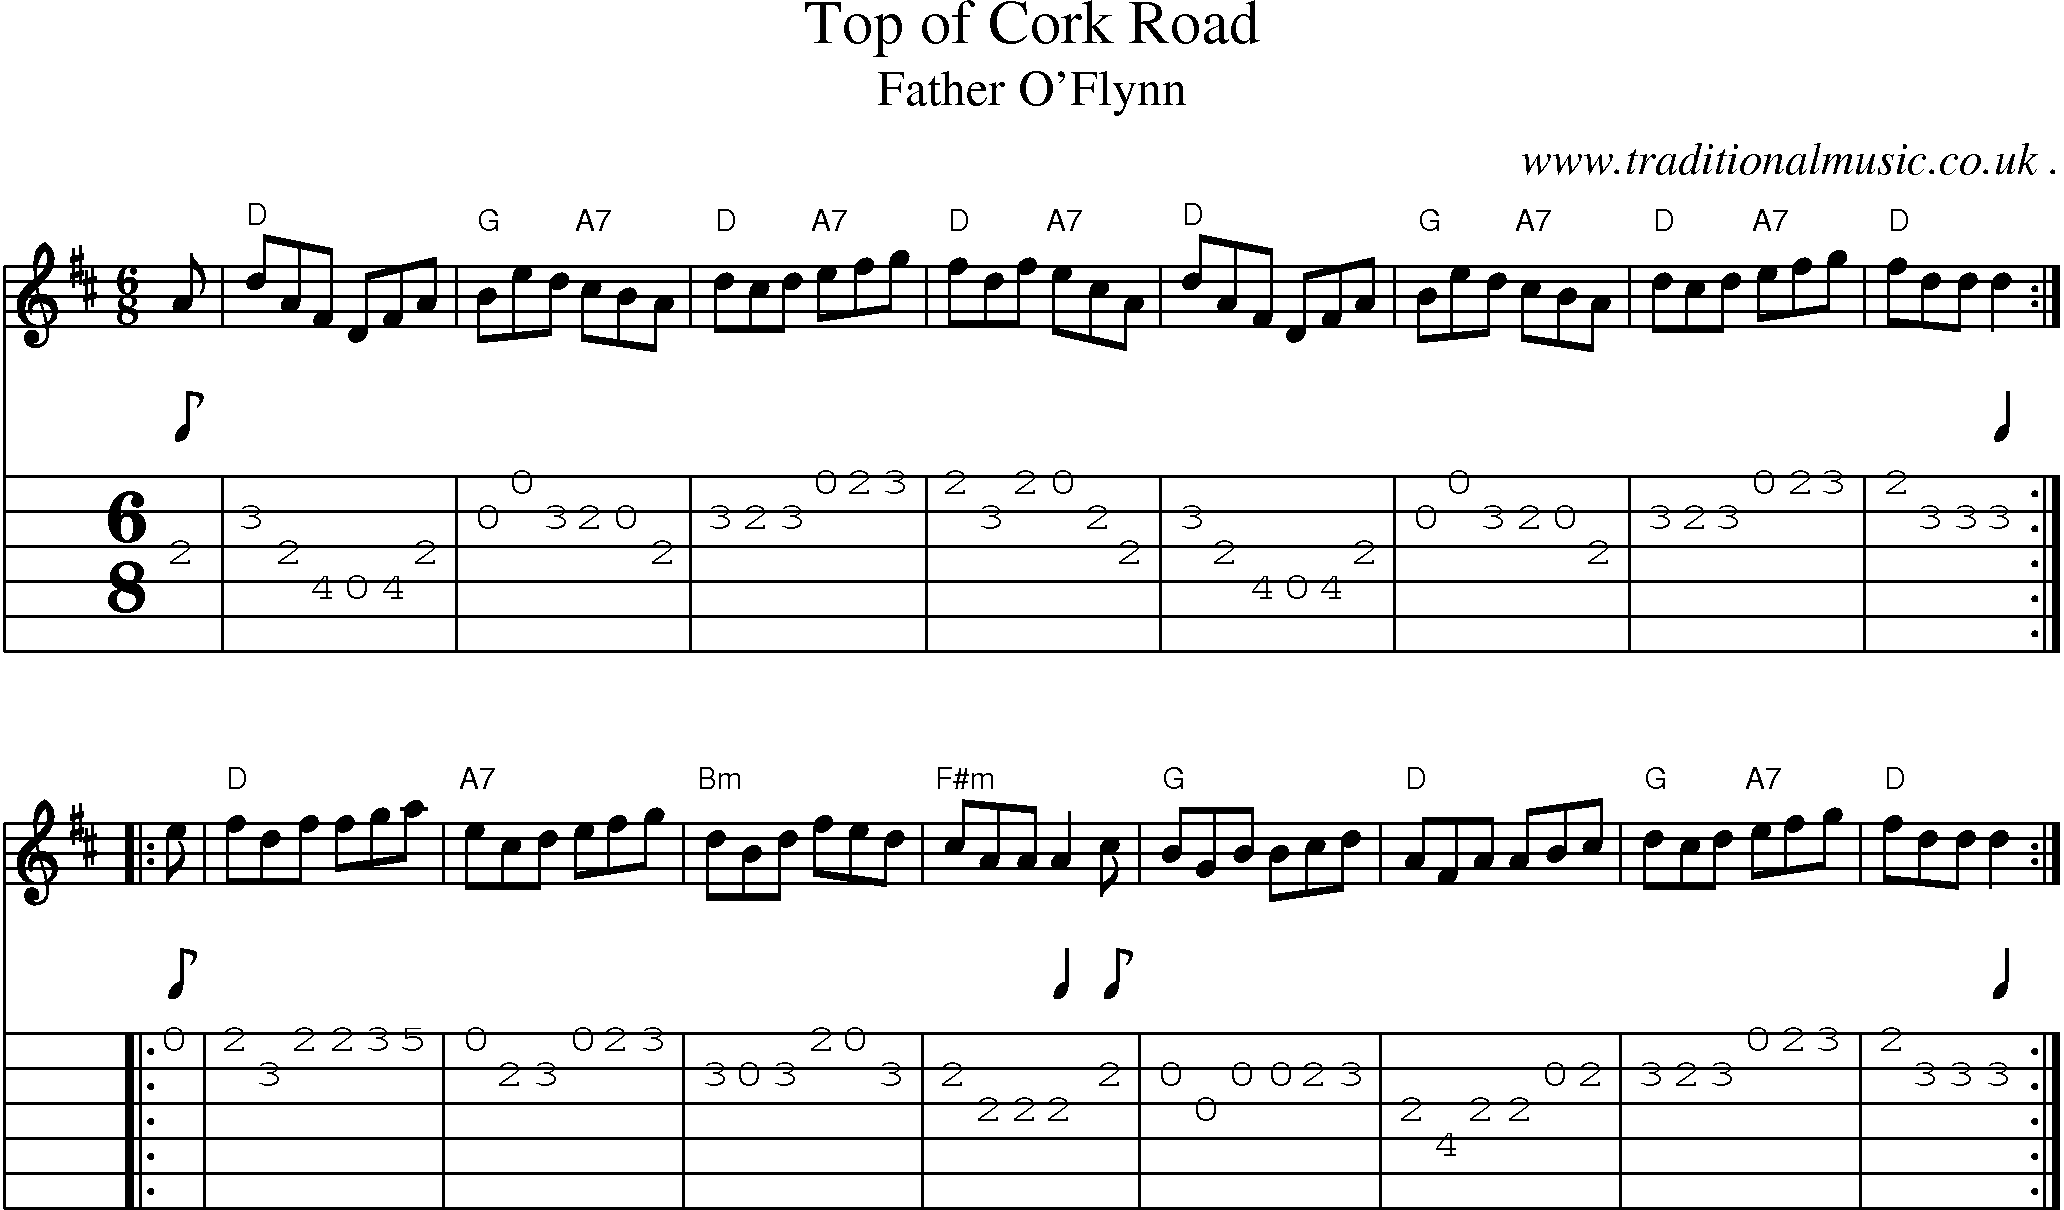 Sheet-music  score, Chords and Guitar Tabs for Top Of Cork Road